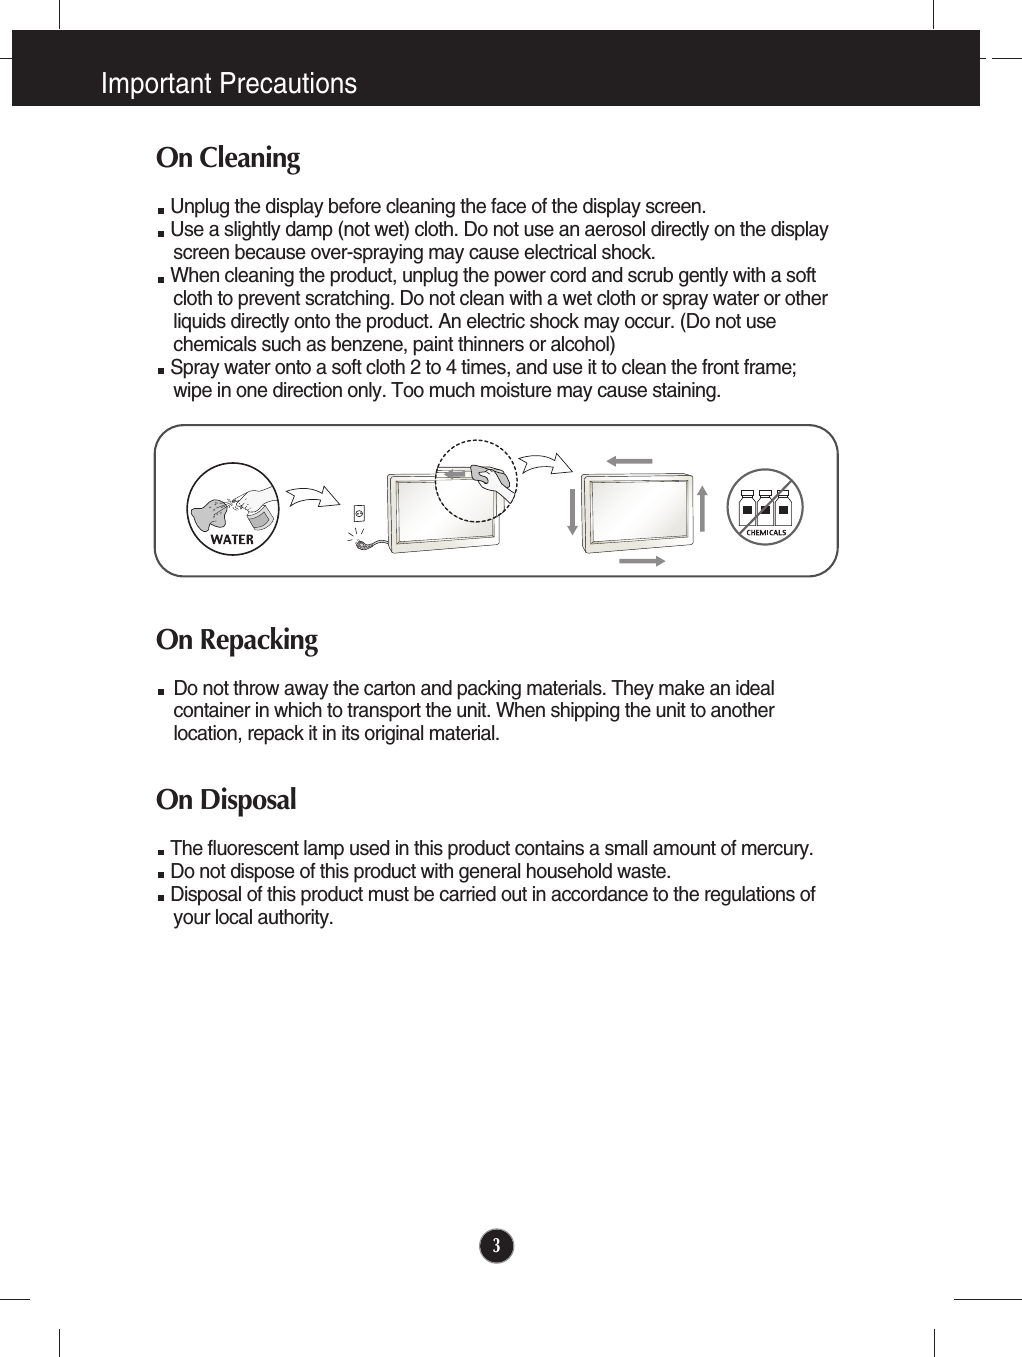 Important Precautions3On CleaningUnplug the display before cleaning the face of the display screen.Use a slightly damp (not wet) cloth. Do not use an aerosol directly on the displayscreen because over-spraying may cause electrical shock.When cleaning the product, unplug the power cord and scrub gently with a softcloth to prevent scratching. Do not clean with a wet cloth or spray water or otherliquids directly onto the product. An electric shock may occur. (Do not usechemicals such as benzene, paint thinners or alcohol) Spray water onto a soft cloth 2 to 4 times, and use it to clean the front frame;wipe in one direction only. Too much moisture may cause staining.  On RepackingDo not throw away the carton and packing materials. They make an idealcontainer in which to transport the unit. When shipping the unit to anotherlocation, repack it in its original material.On Disposal The fluorescent lamp used in this product contains a small amount of mercury.Do not dispose of this product with general household waste.Disposal of this product must be carried out in accordance to the regulations ofyour local authority.